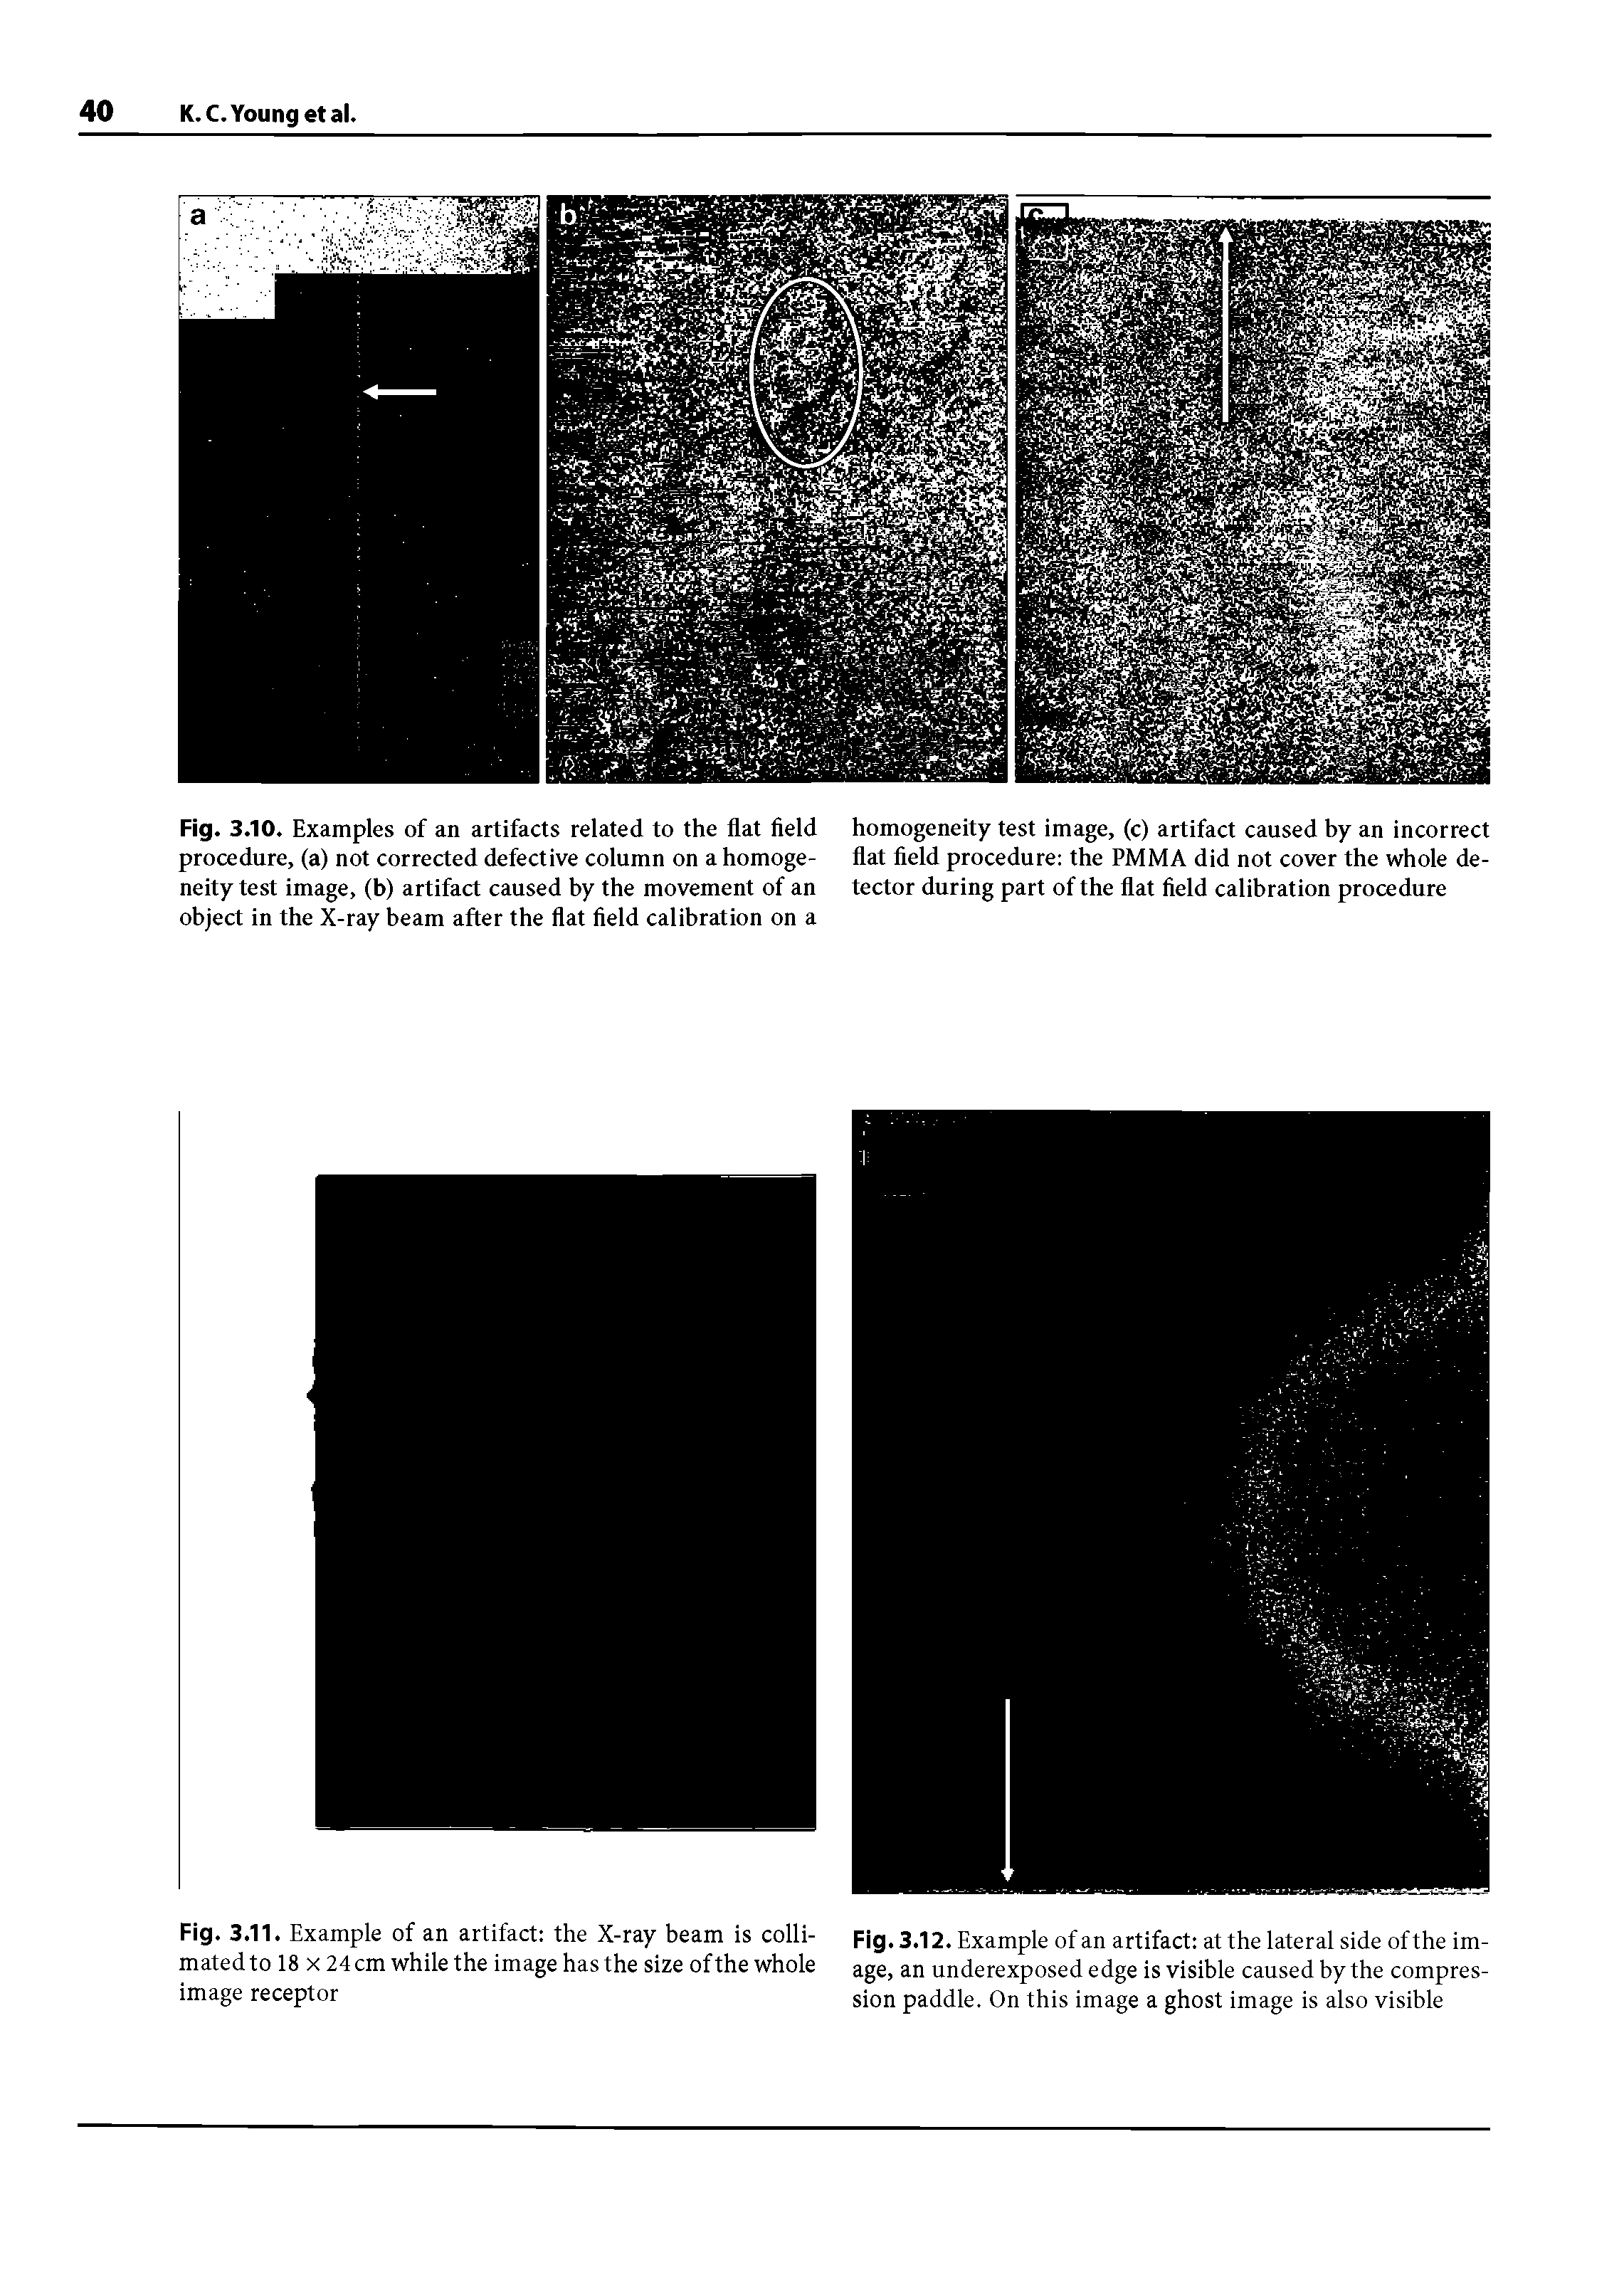 Fig. 3.12. Example of an artifact at the lateral side of the image, an underexposed edge is visible caused by the compression paddle. On this image a ghost image is also visible...